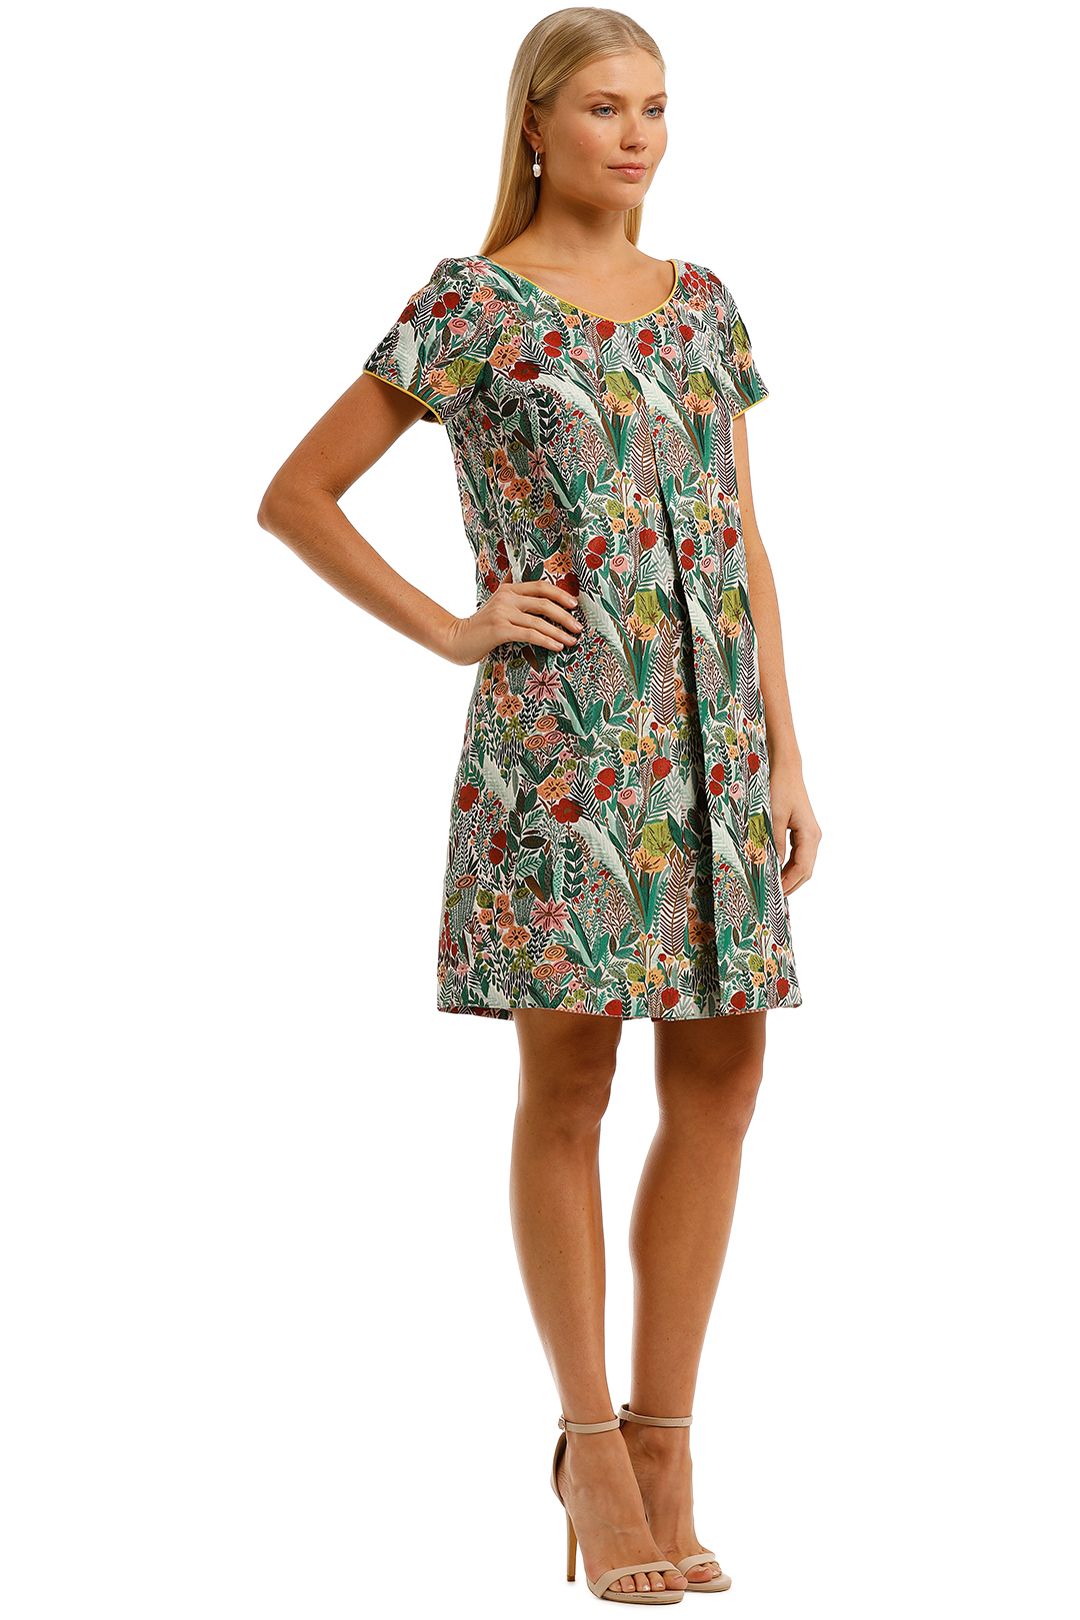 Cooper-By-Trelise-Cooper-Peony-For-Your-Thoughts-Dress-Green-Multi-Side